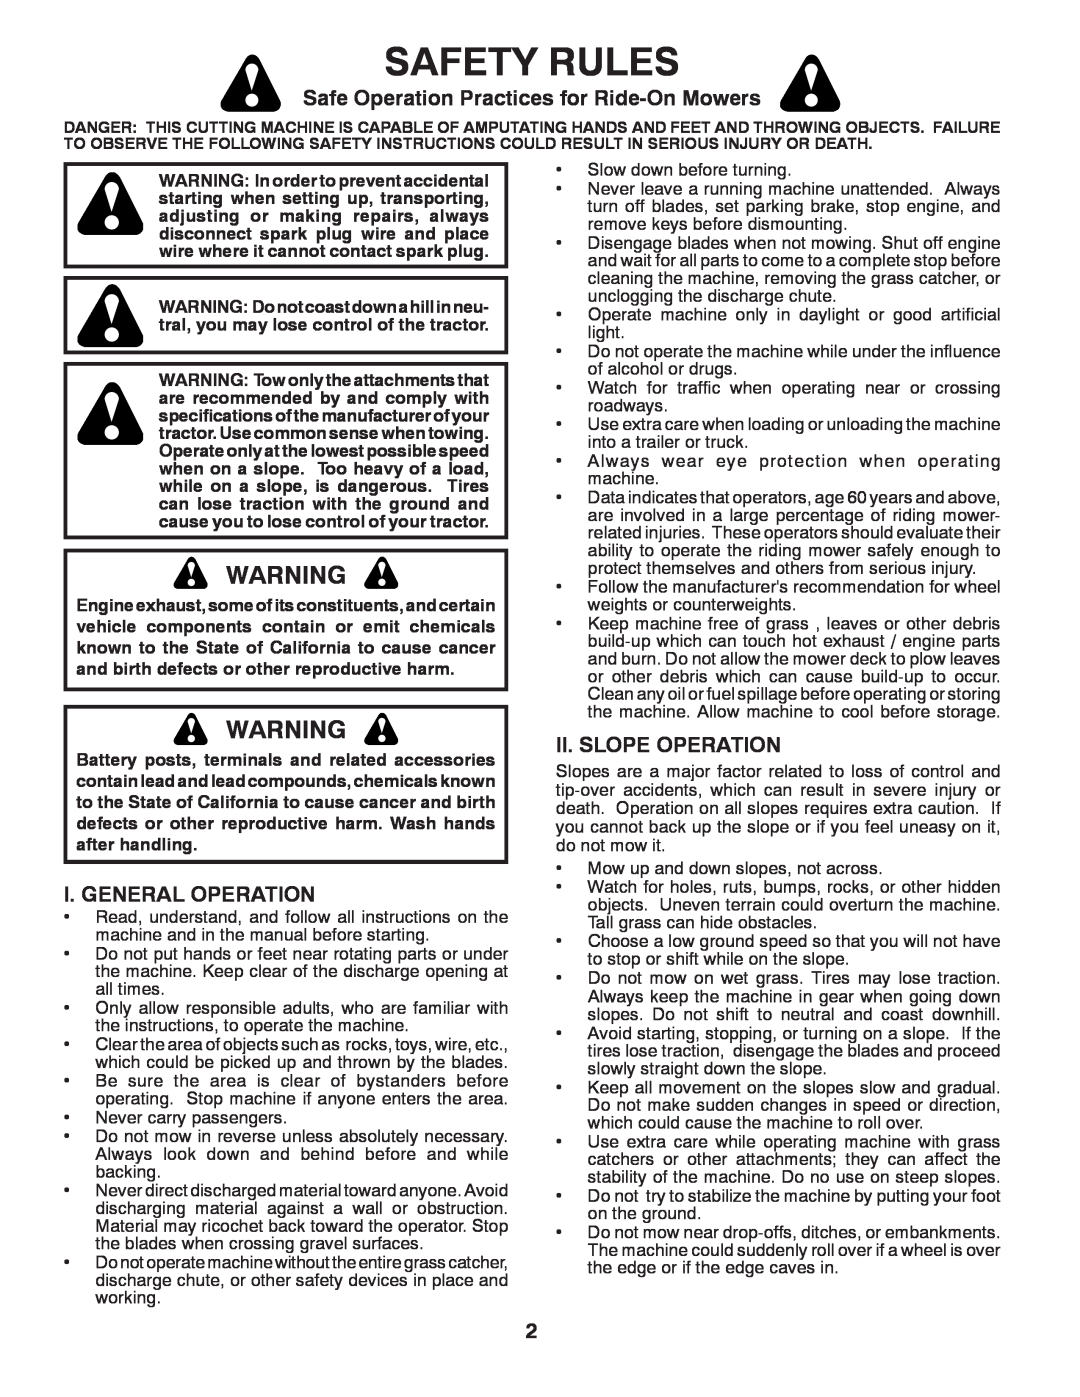 McCulloch MC13538LT Safety Rules, Safe Operation Practices for Ride-On Mowers, I. General Operation, Ii. Slope Operation 